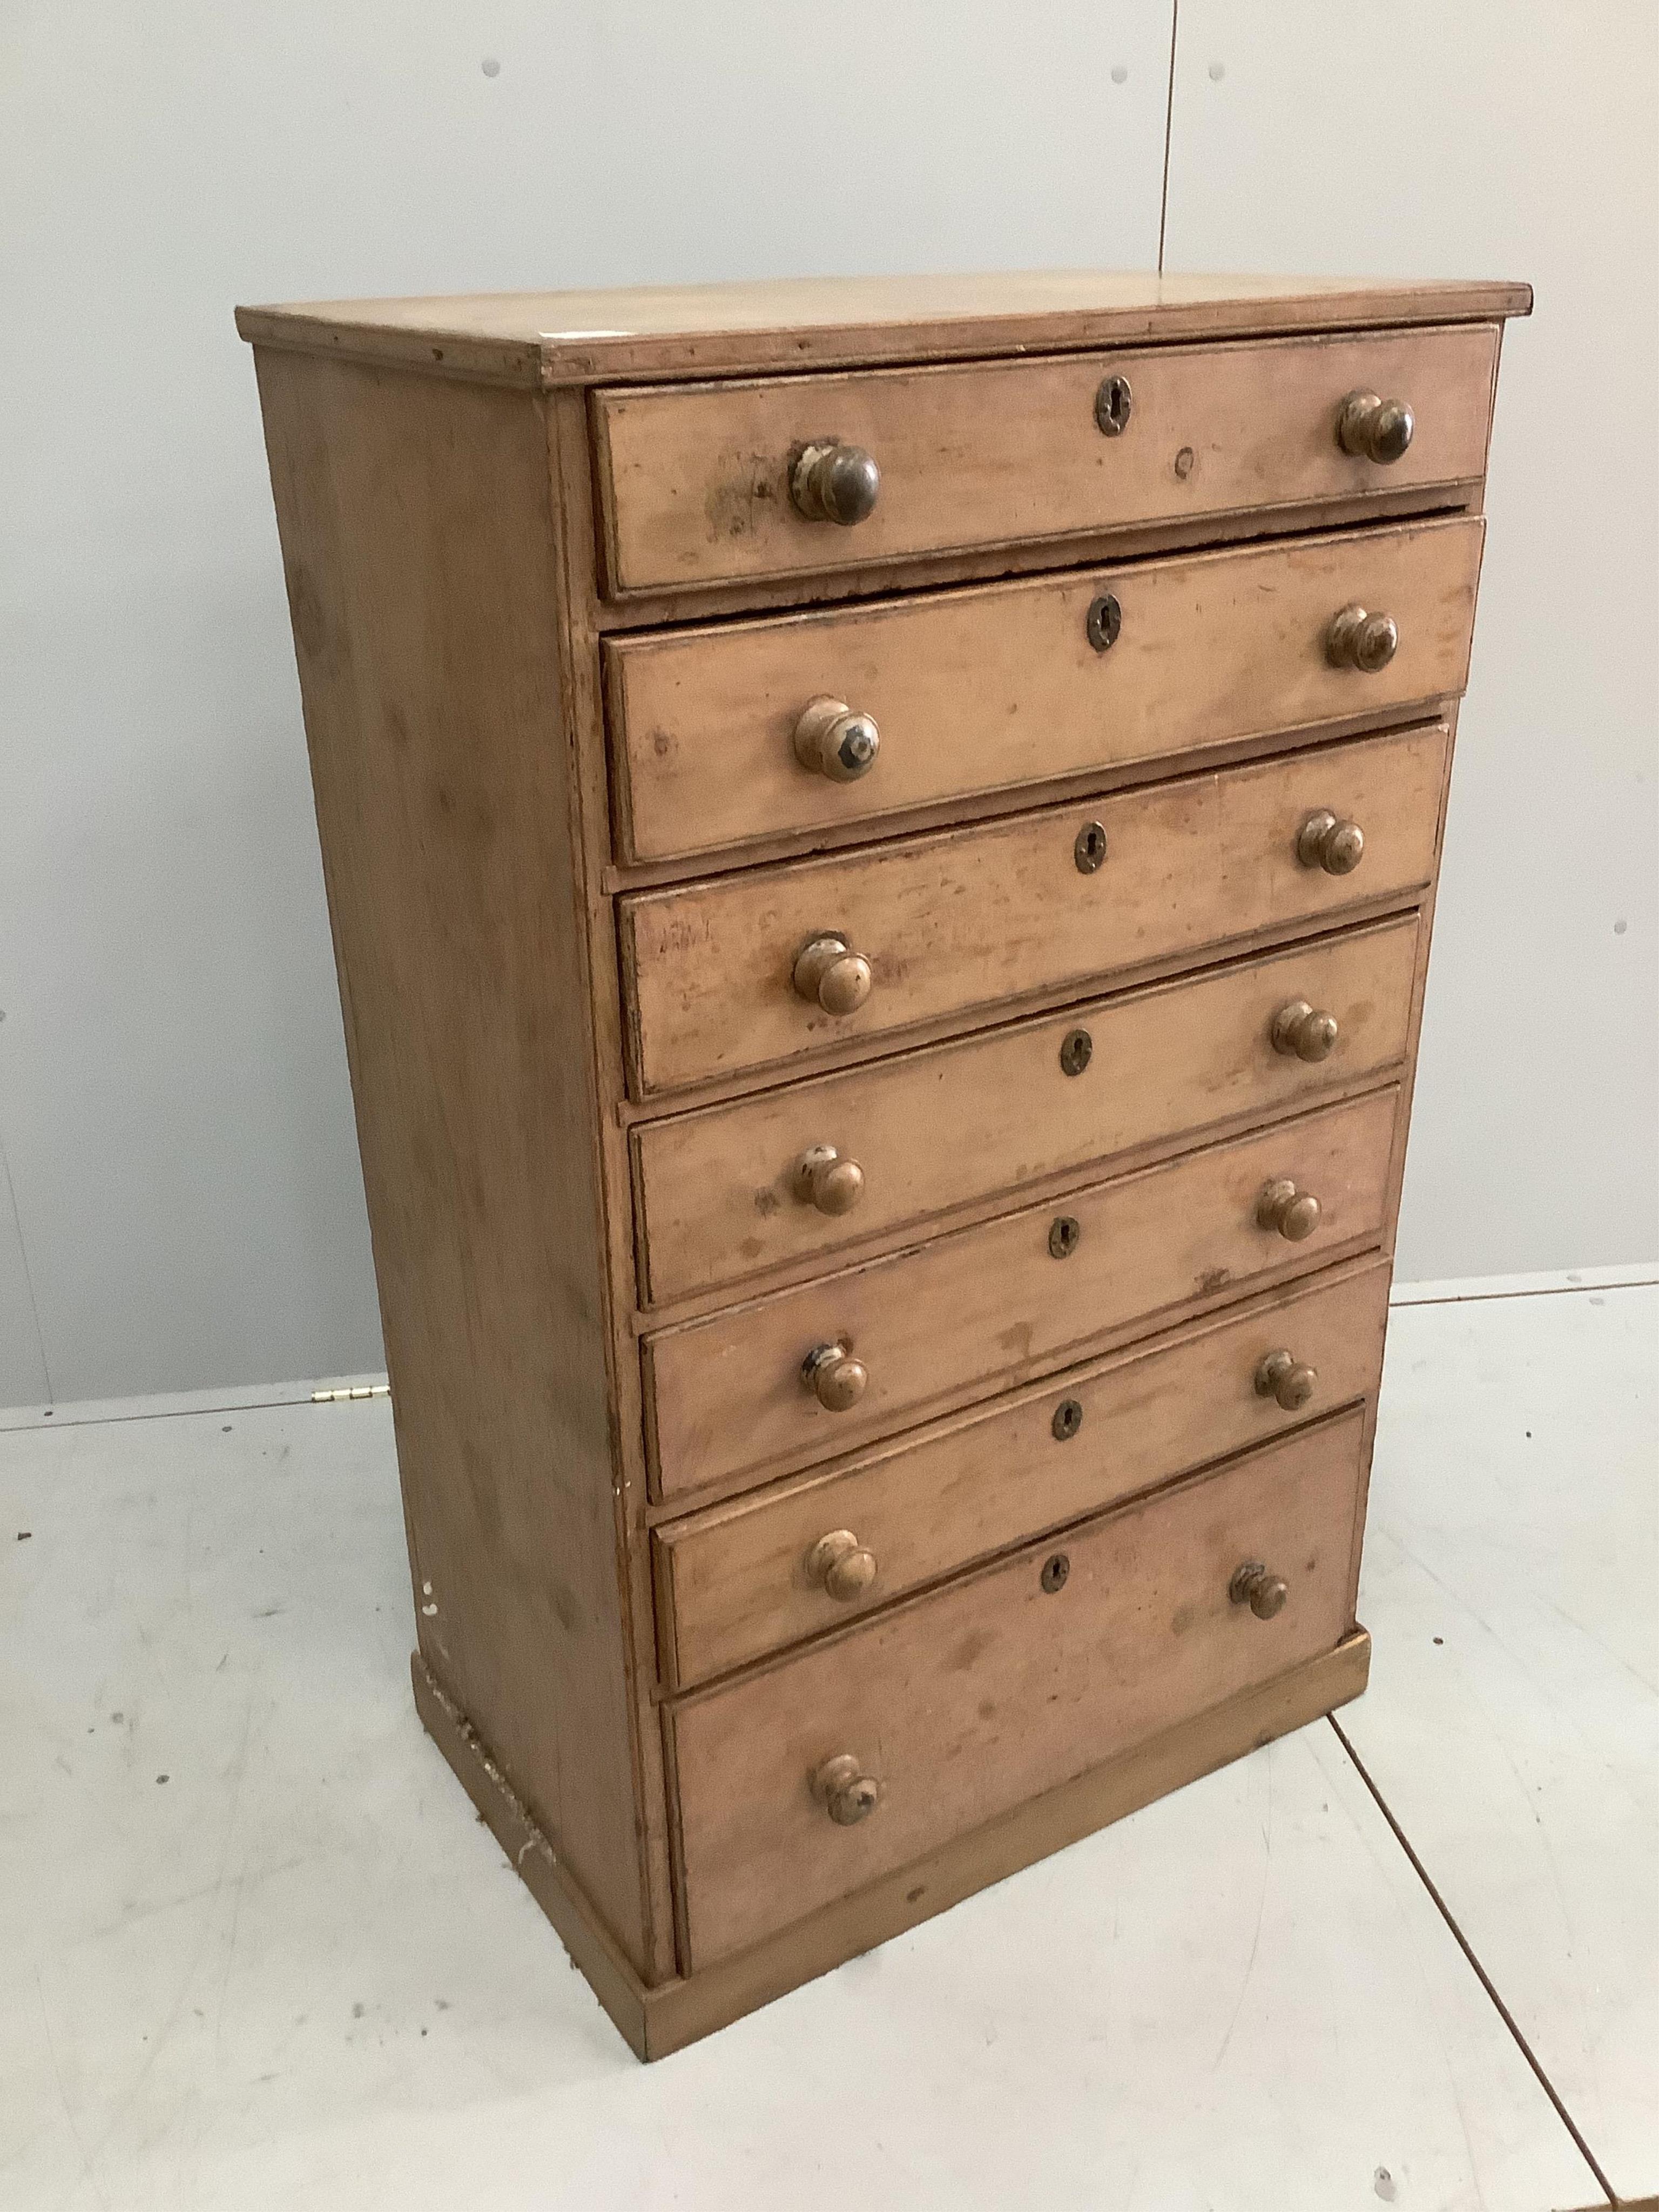 A French mid 19th century painted pine narrow chest of seven drawers, width 73cm, depth 44cm, height 117cm. Condition - fair